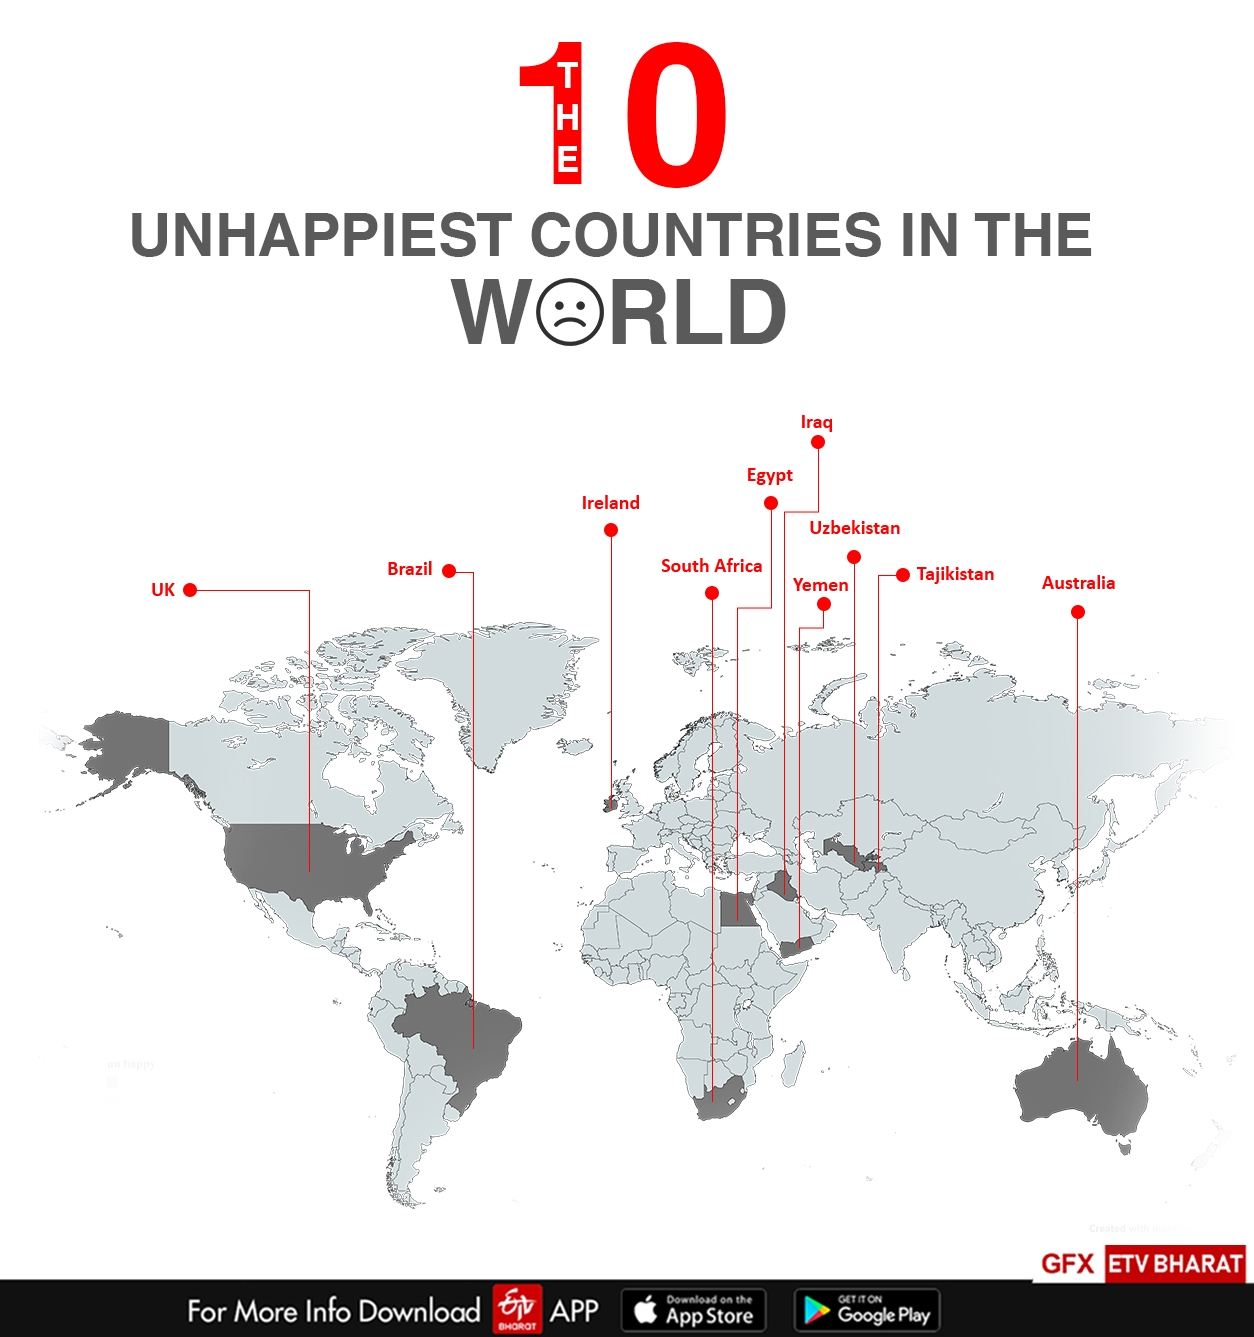 Unhappiest Countries in the World